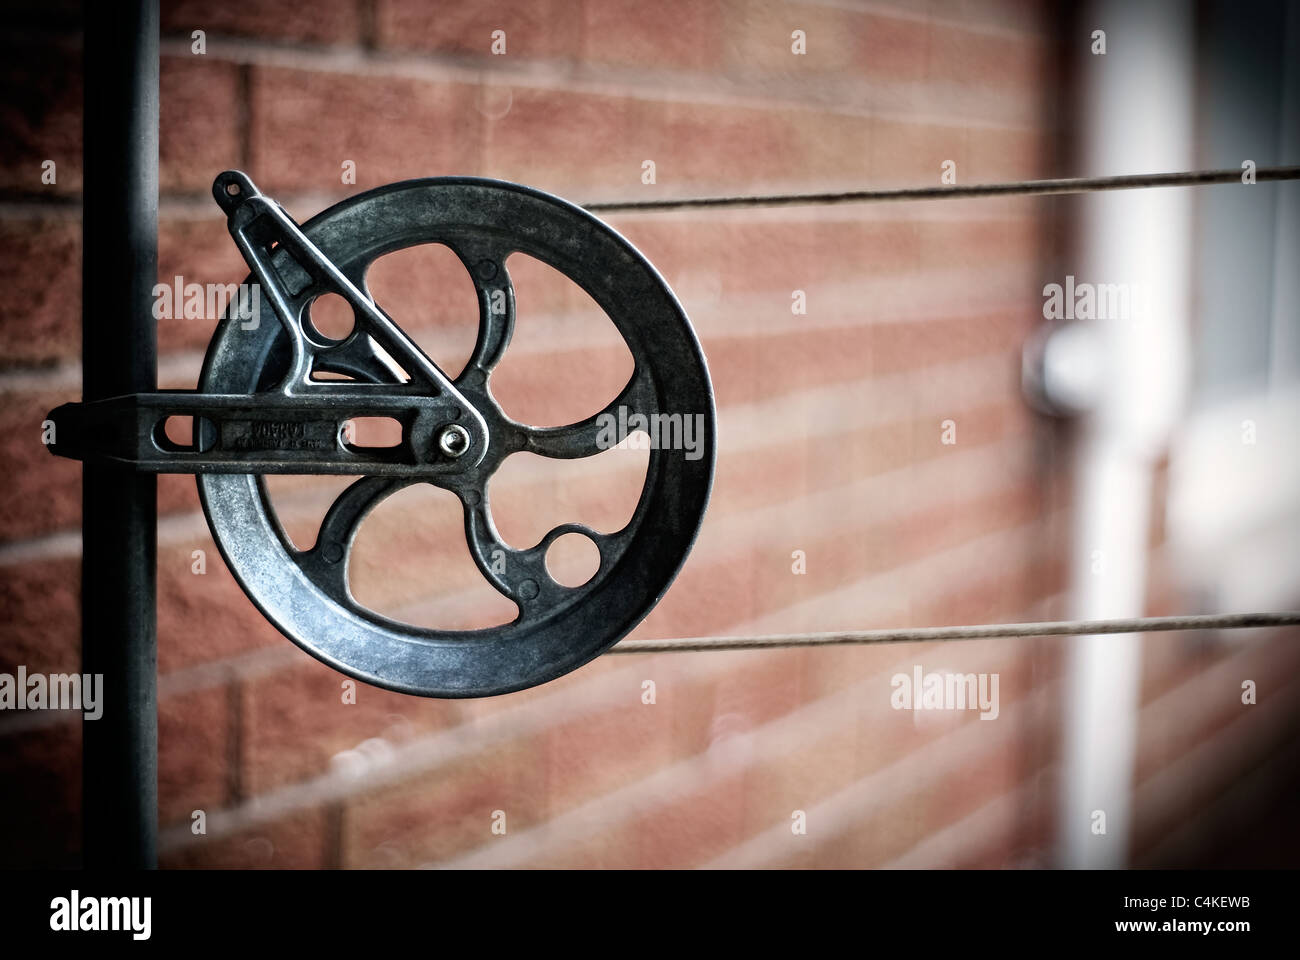 Close-up image of an old, steel clothesline pulley. Stock Photo